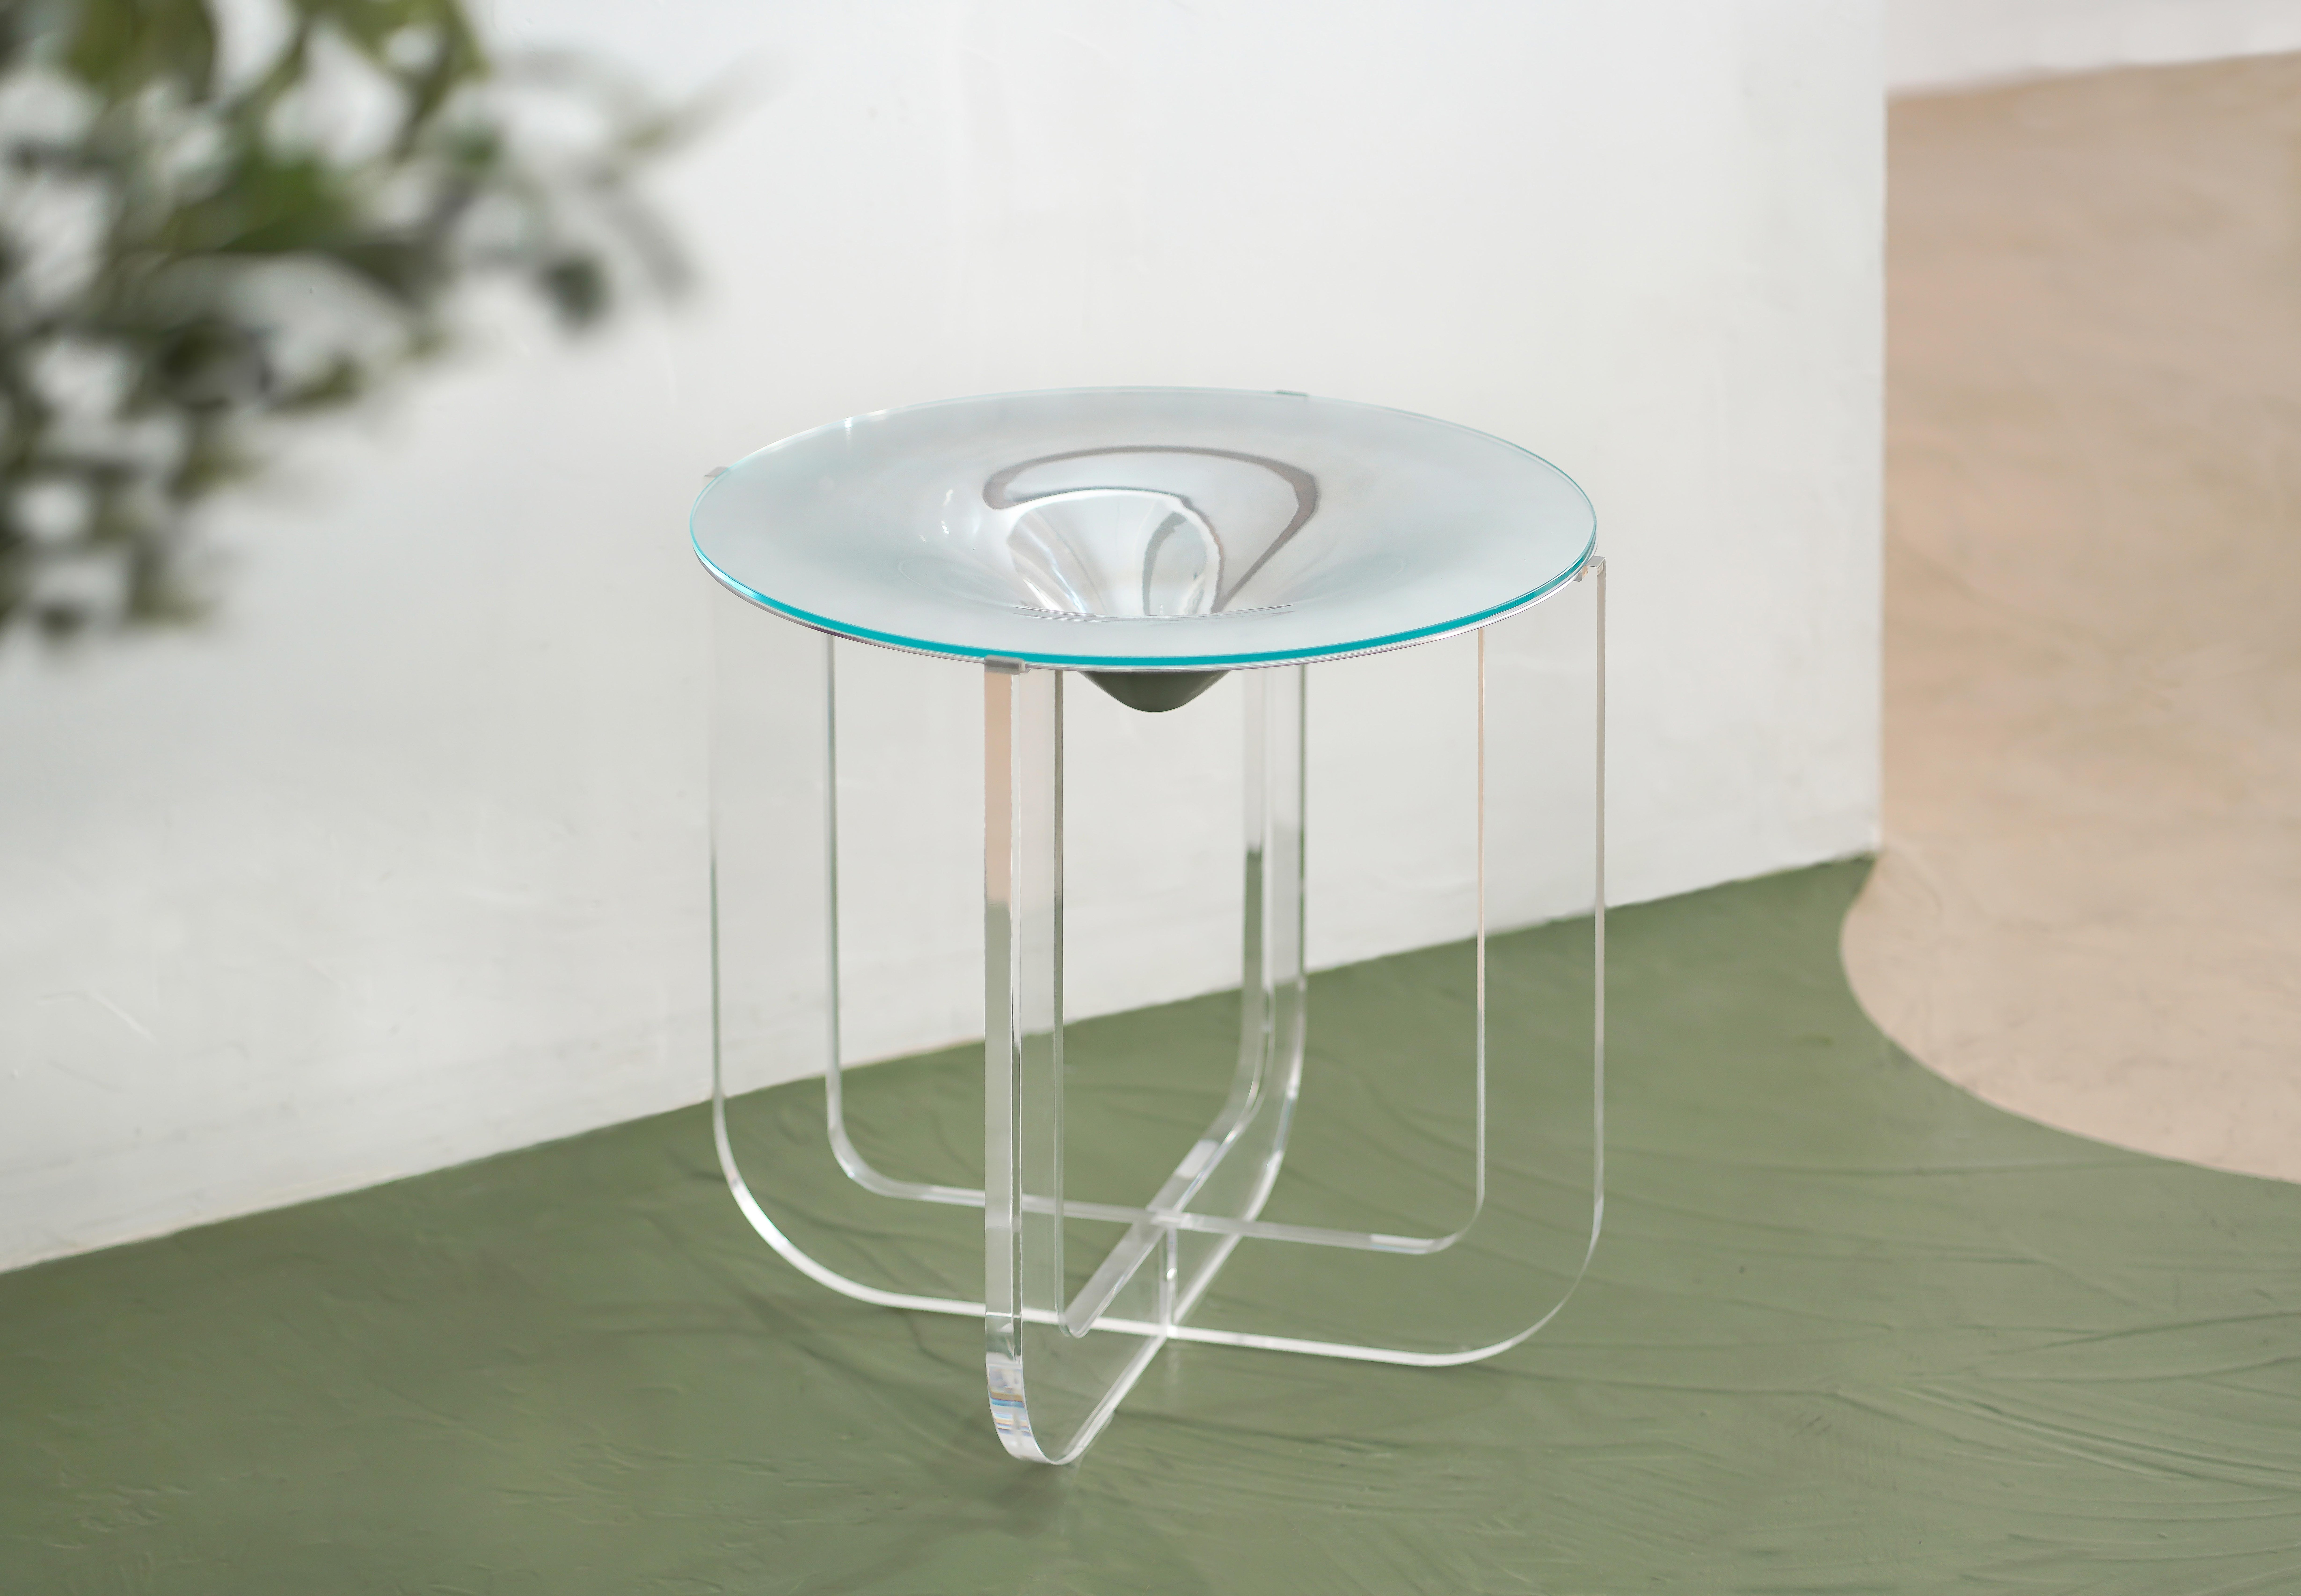 Inspired by the rippling of water, the 'Be Still' side table by Curious Works represents the pursuit of stillness. The table disappears in your environment and slowly reveals itself as you walk towards it. The aluminum reflects and distorts the